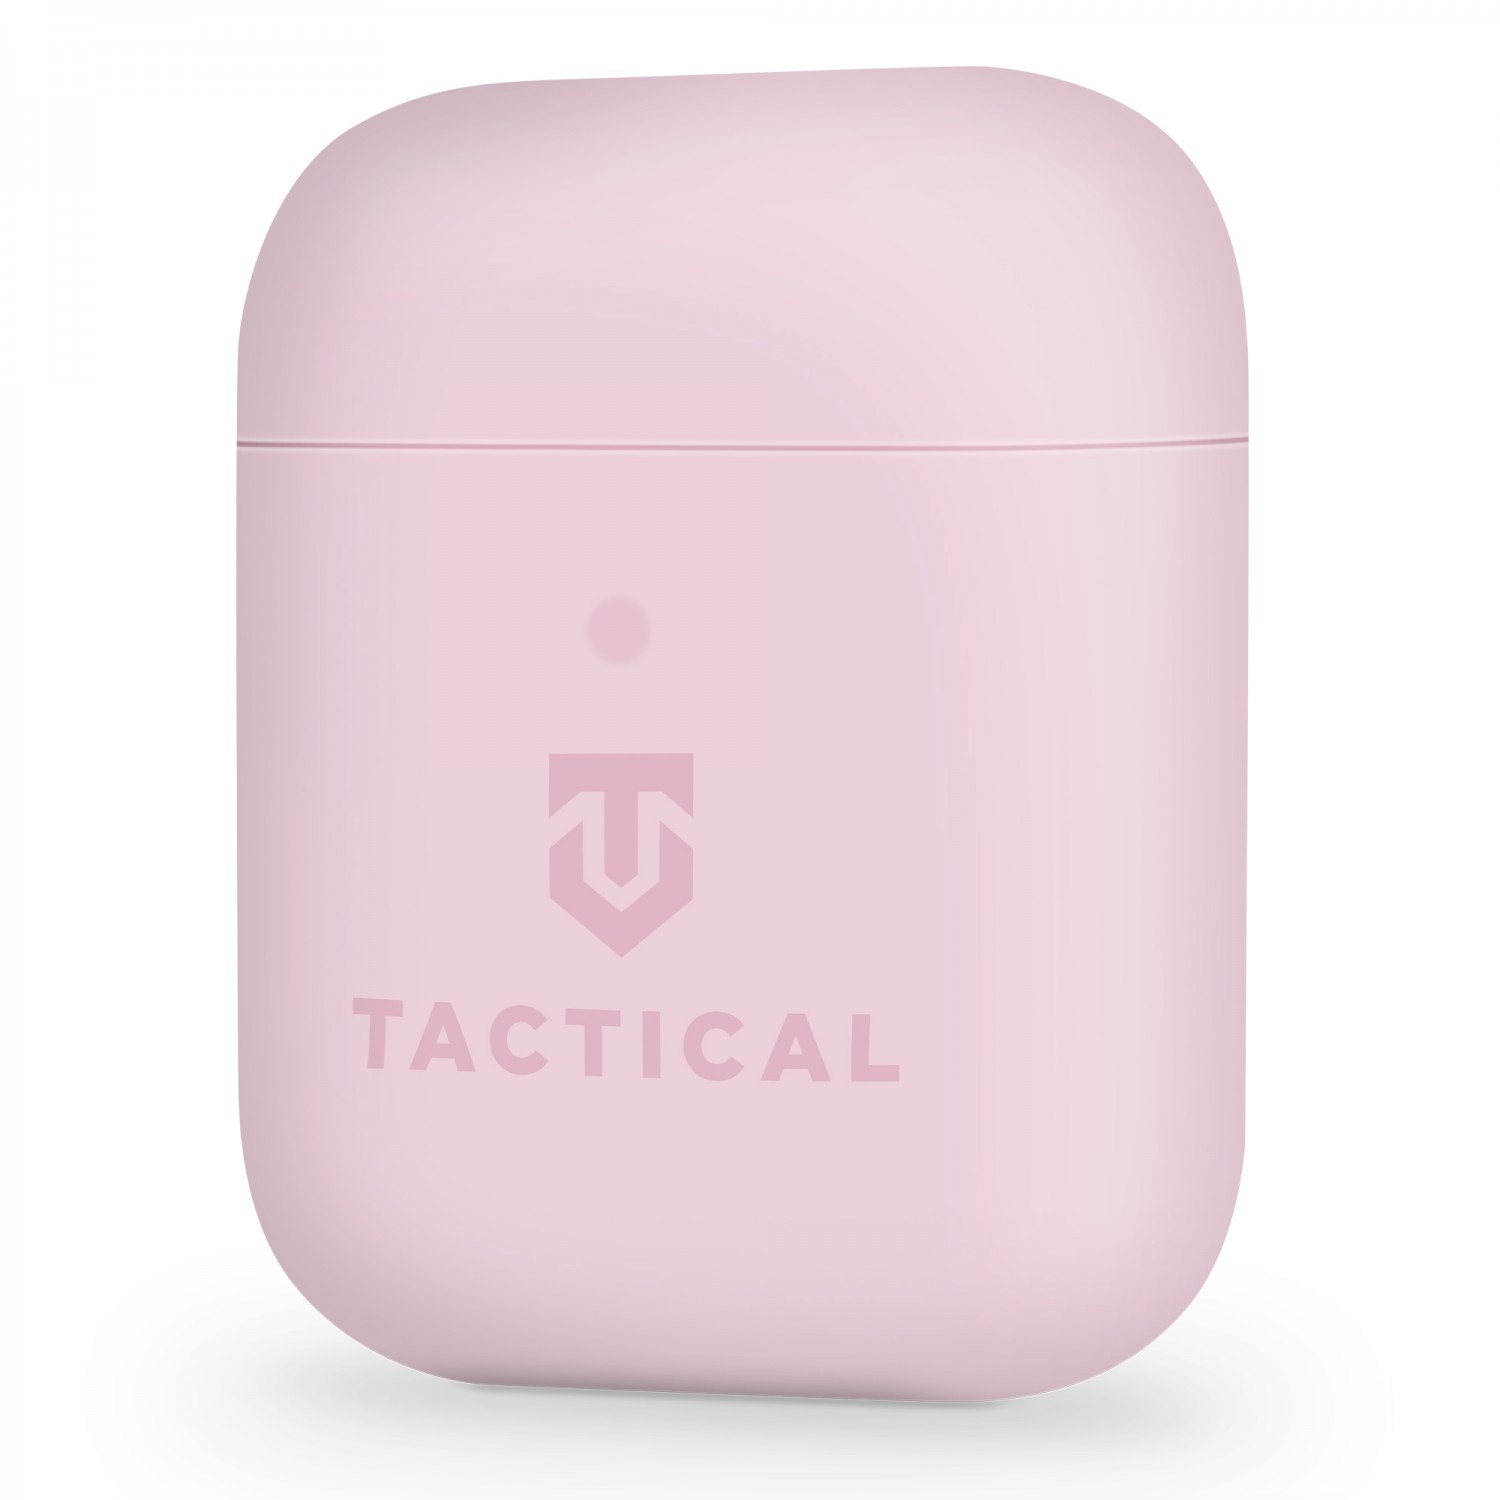 Tactical Velvet Smoothie silikonové pouzdro, obal, kryt Apple AirPods pink panther